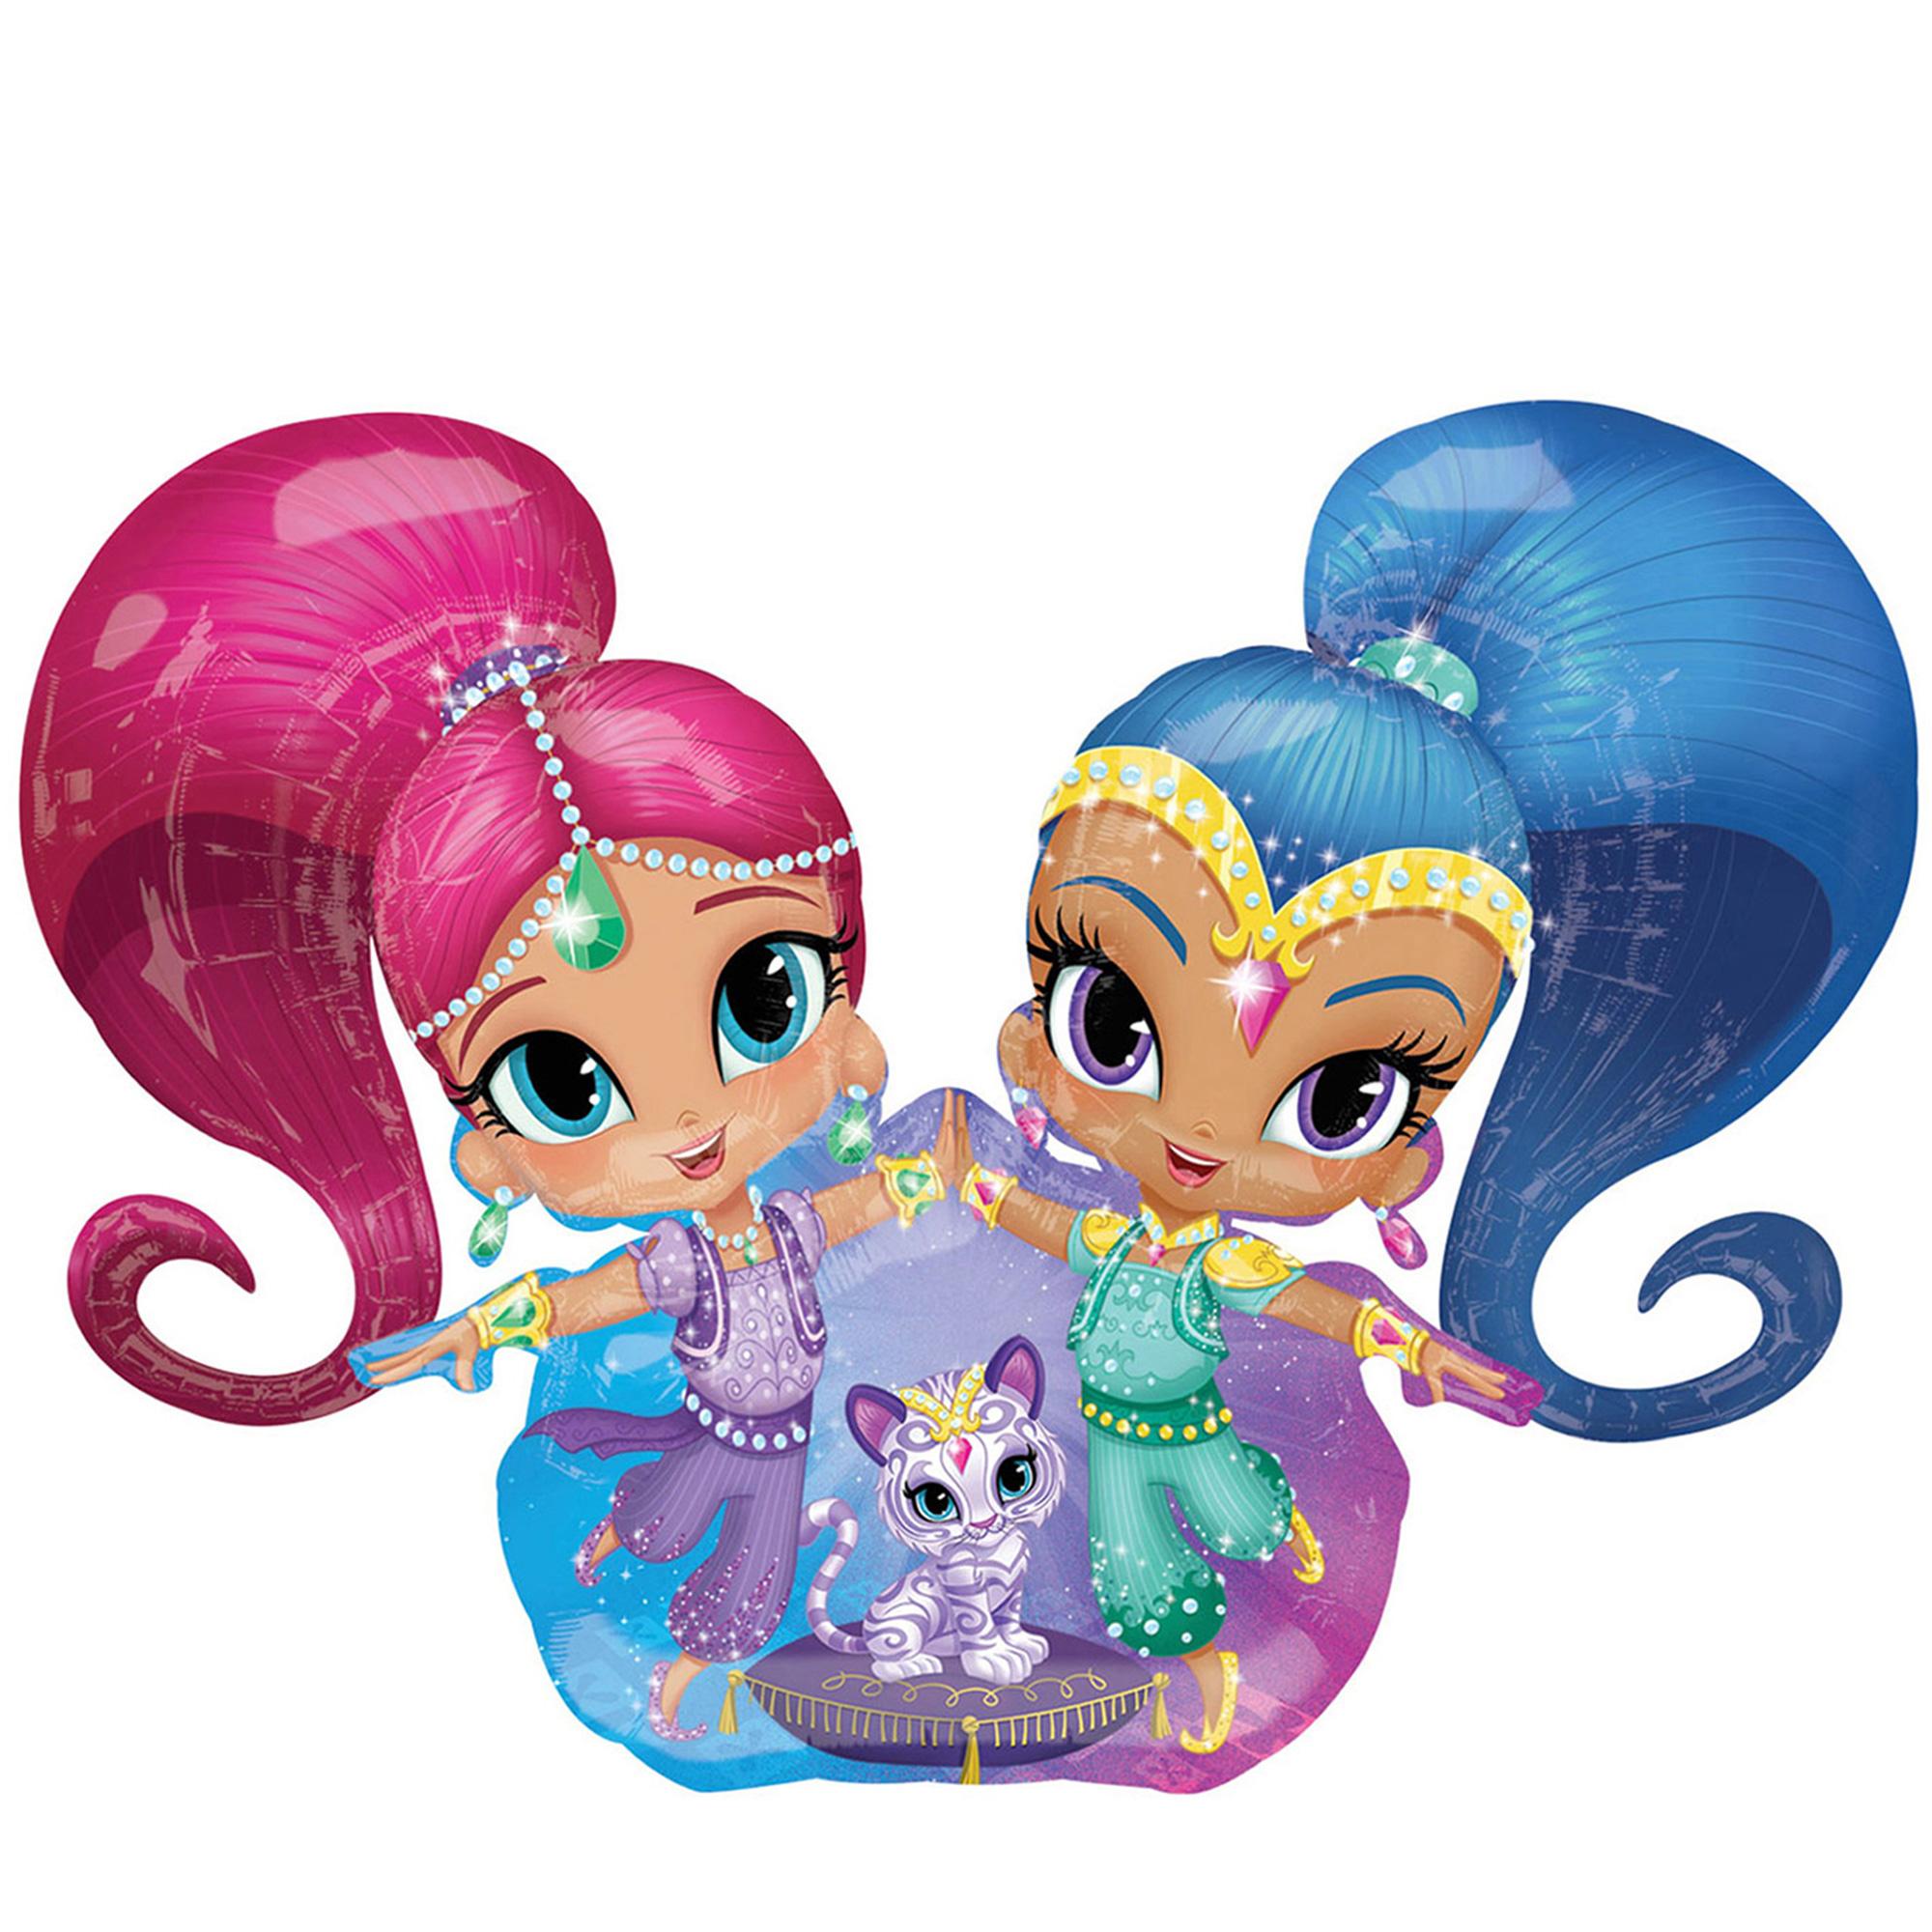 Shimmer and Shine Airwalker Balloon 53x44in Balloons & Streamers - Party Centre - Party Centre